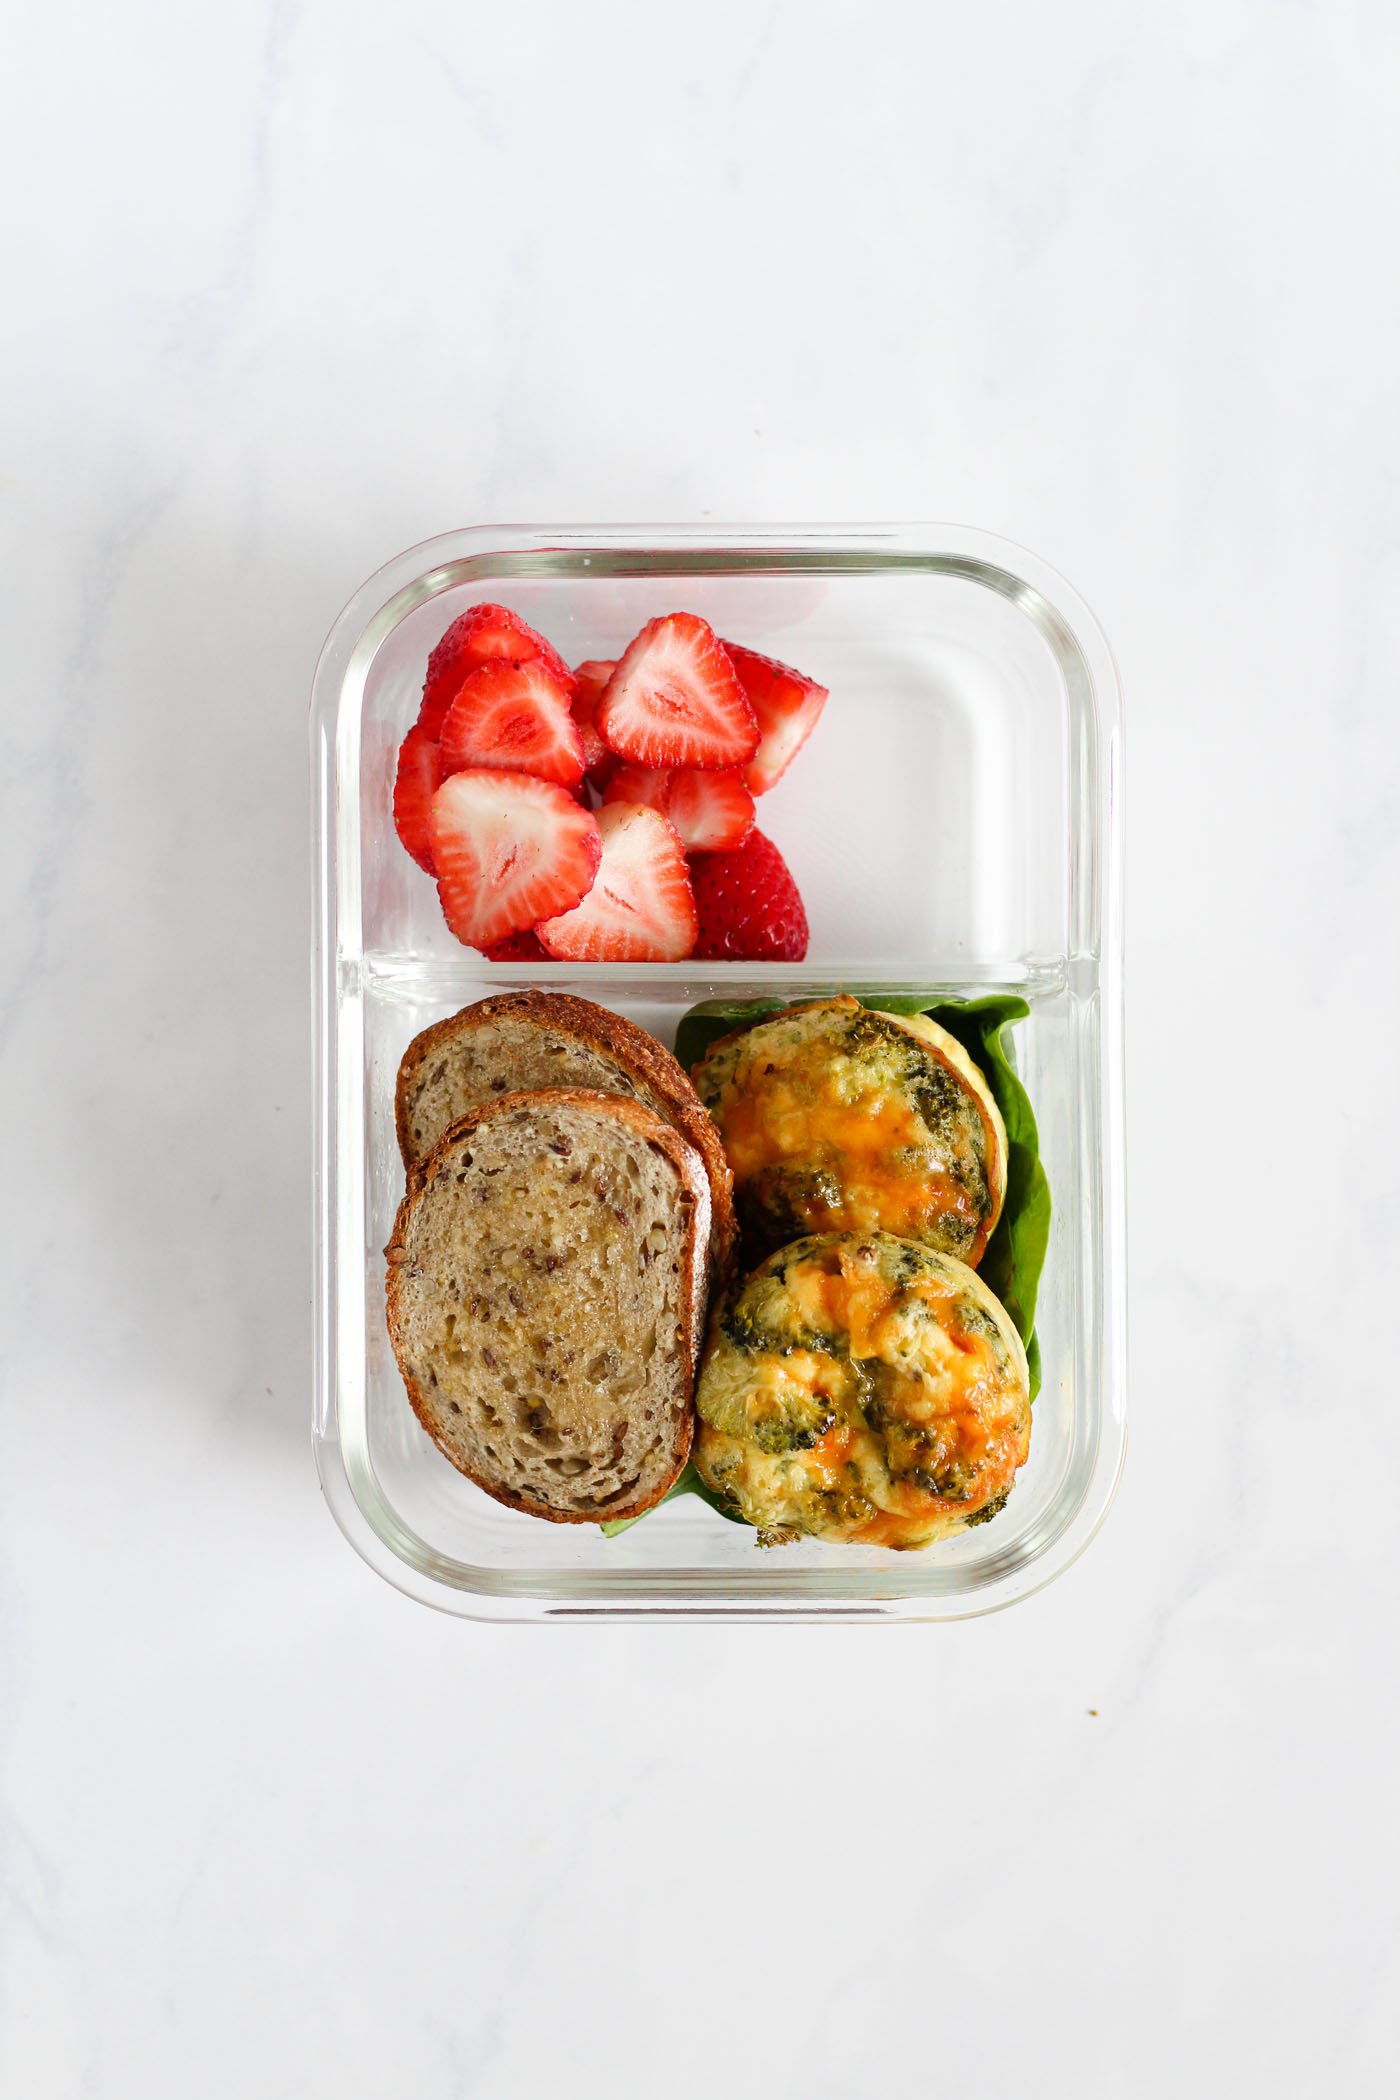 lunch box with egg bites, toast, spinach and strawberries